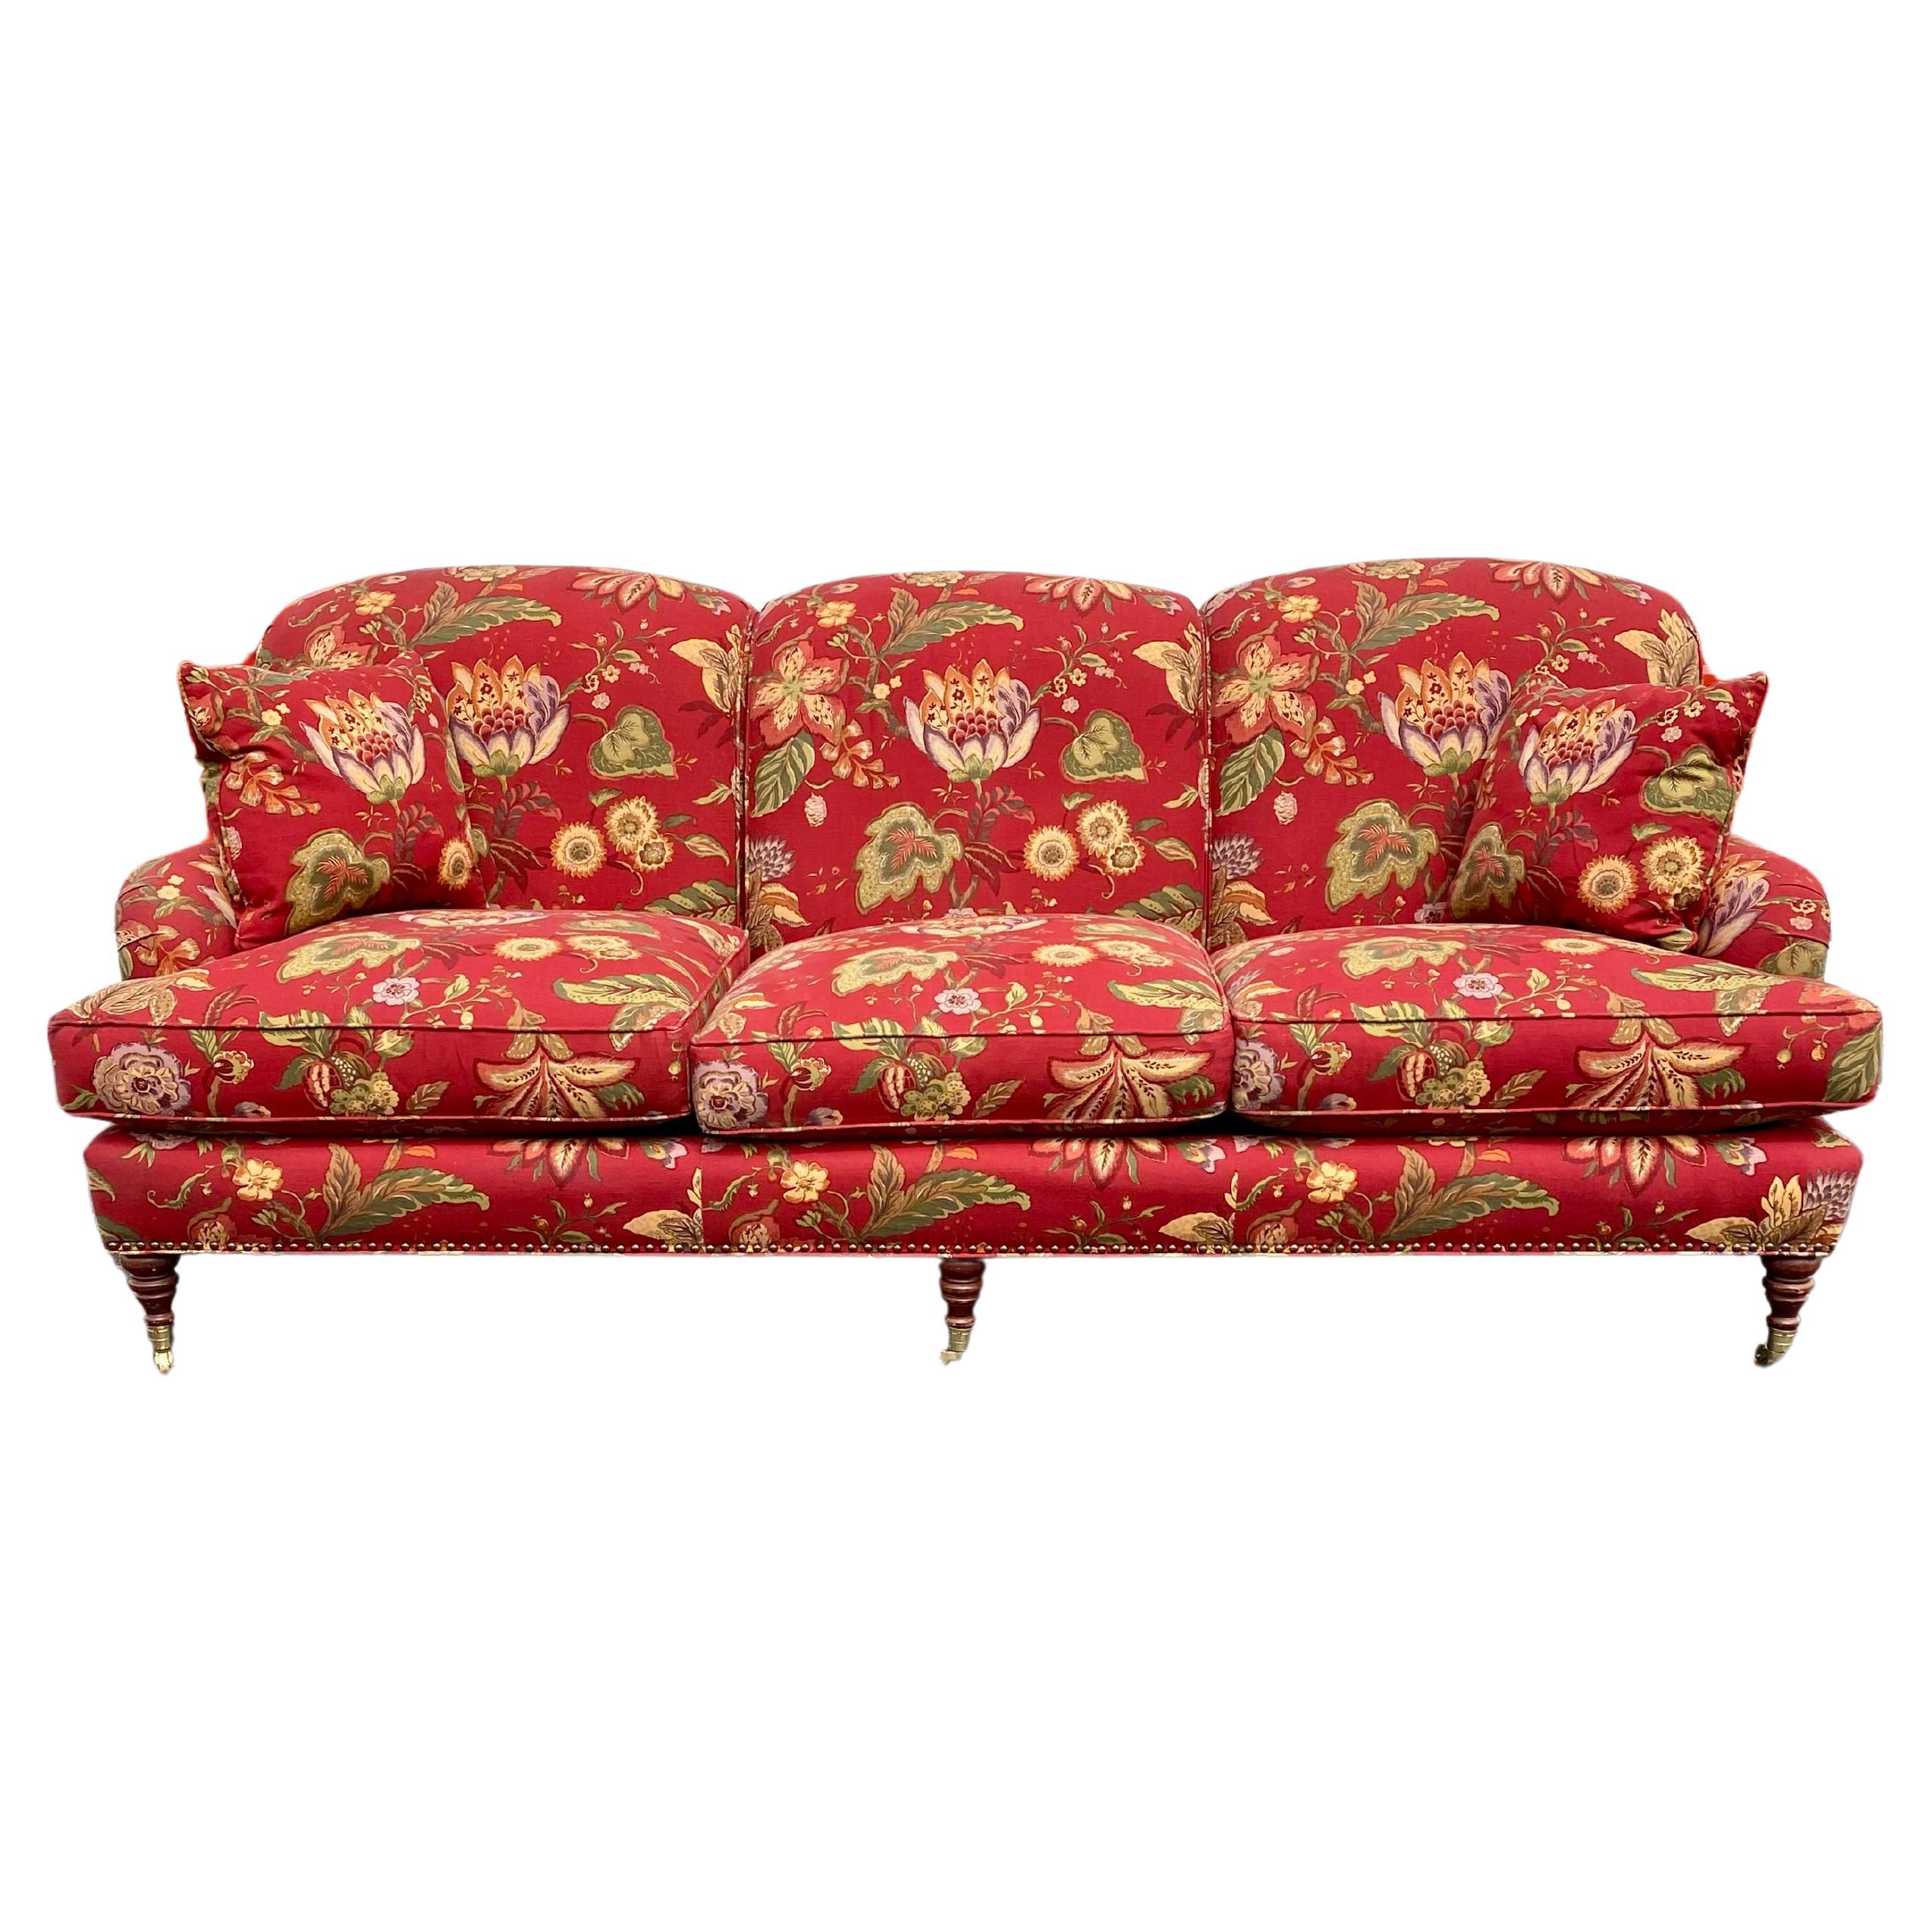 1980s Attributed to George Smith Chintz Floral Linen English Sofa